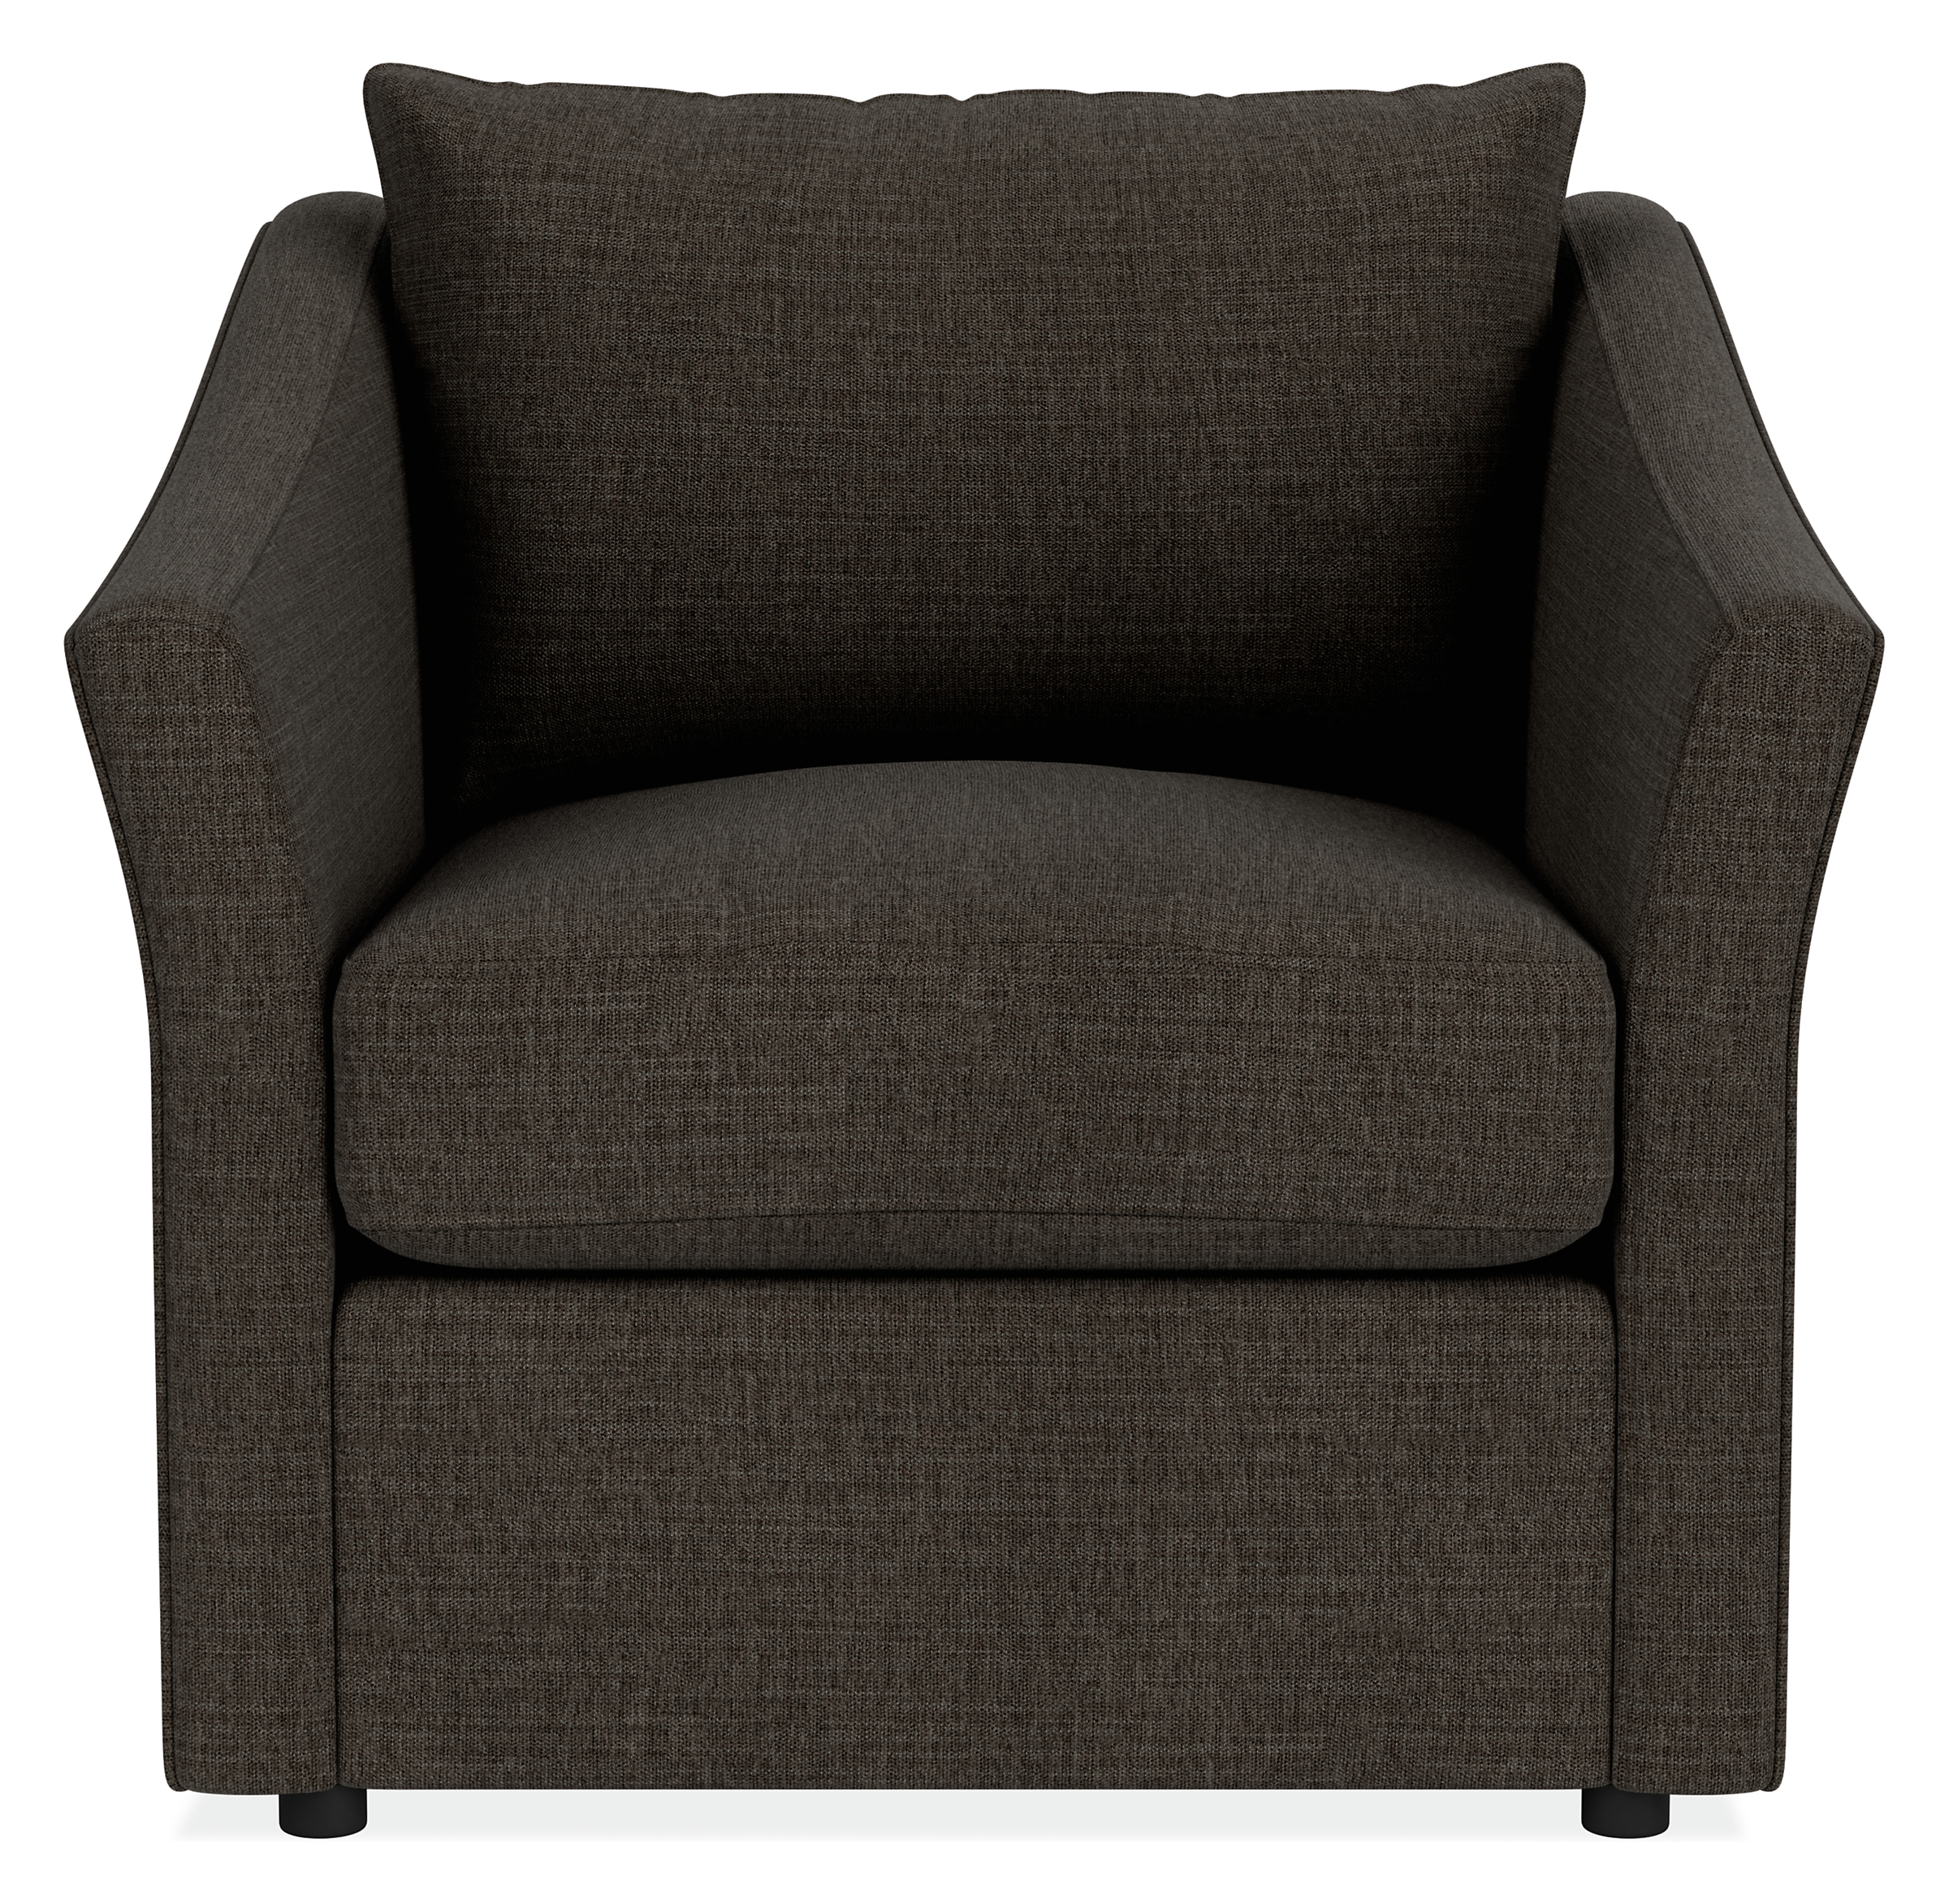 Front view of Maeve Chair in Mori Charcoal.